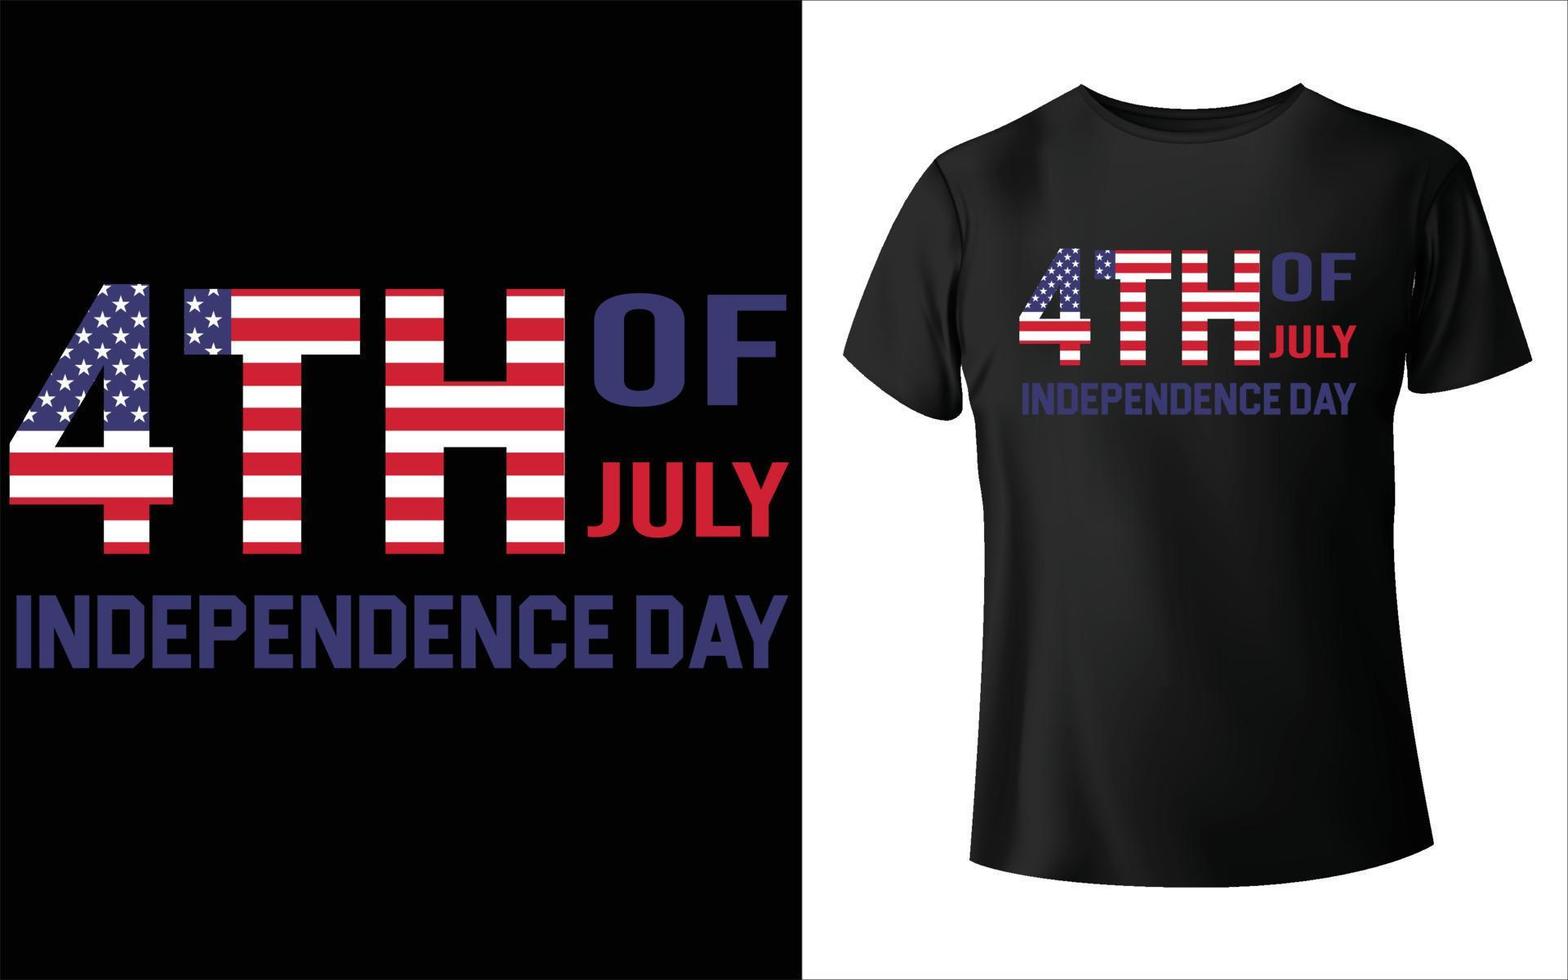 happy 4th of July independence day t-shirt design, 4th of July independence day t-shirt design, 4th of July 1776 independence day t-shirt design, vektor